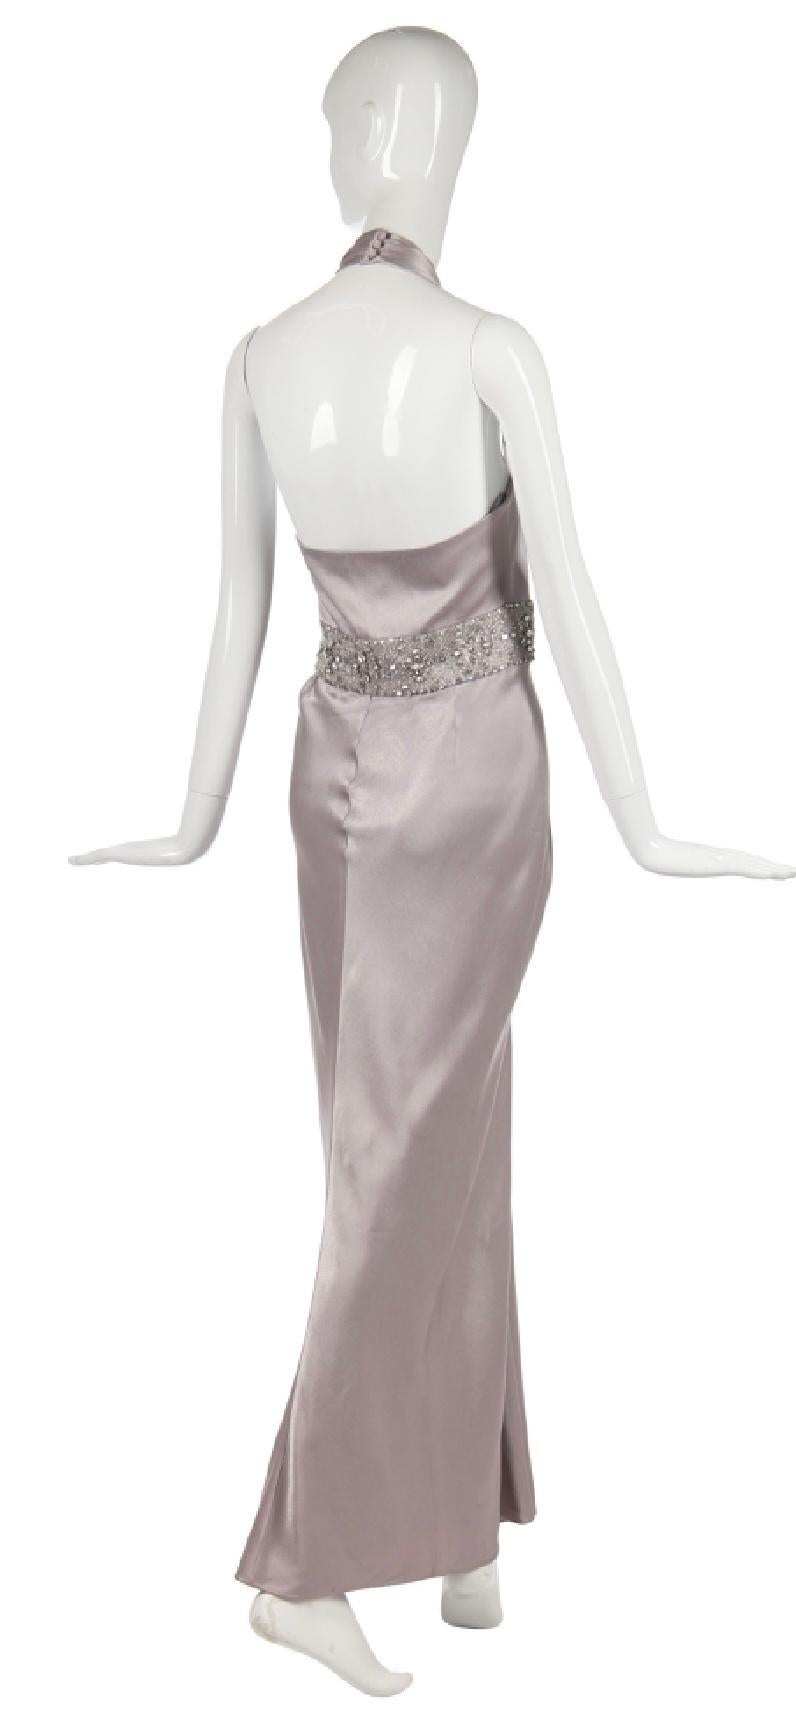 Sumptuous silver satin Christian Dior by John Galliano gown. With elegant pleating, a plunging neckline, and an ornate rhinestone waist, this dress is the height of timeless glamour. Fastens with signature Dior button and loops up the side. 2009. GB